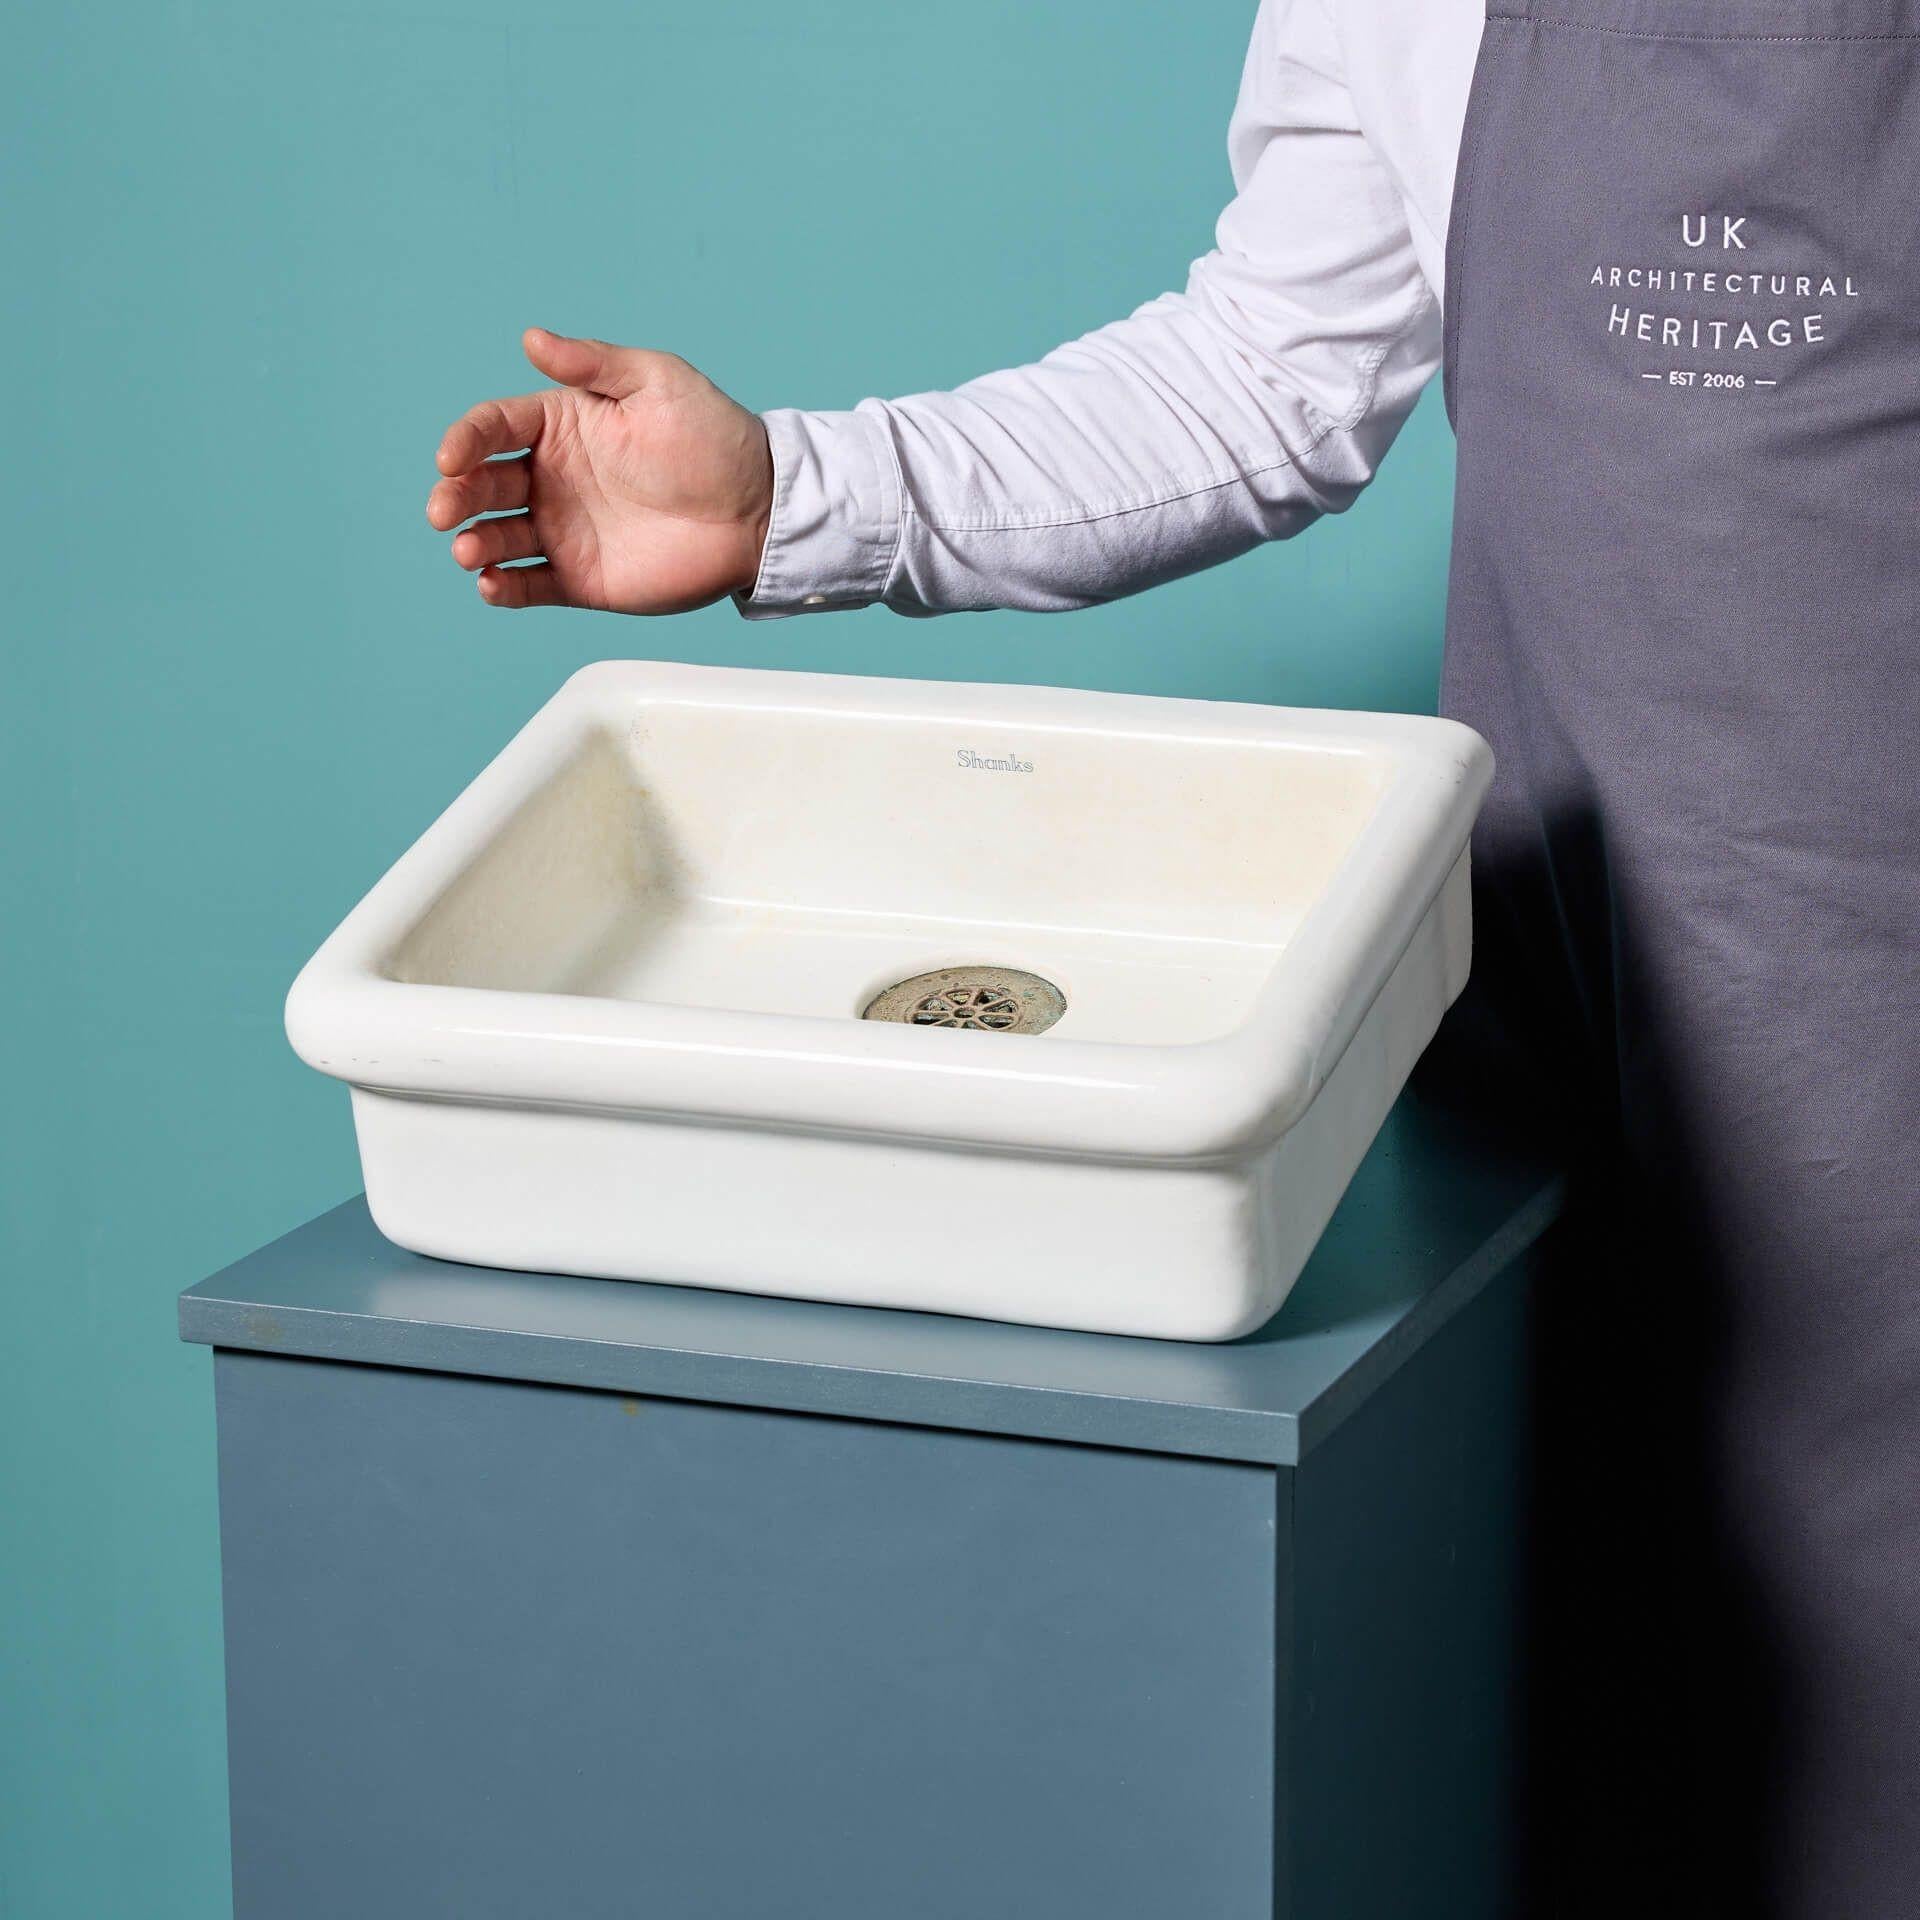 A reclaimed petite Shanks Belfast basin dating to circa 1920. With a wonderfully shaped rim, this unusually sized sink could be flush mounted into a counter top or supported on brackets. Its desirable shallow basin is suitable for period and modern